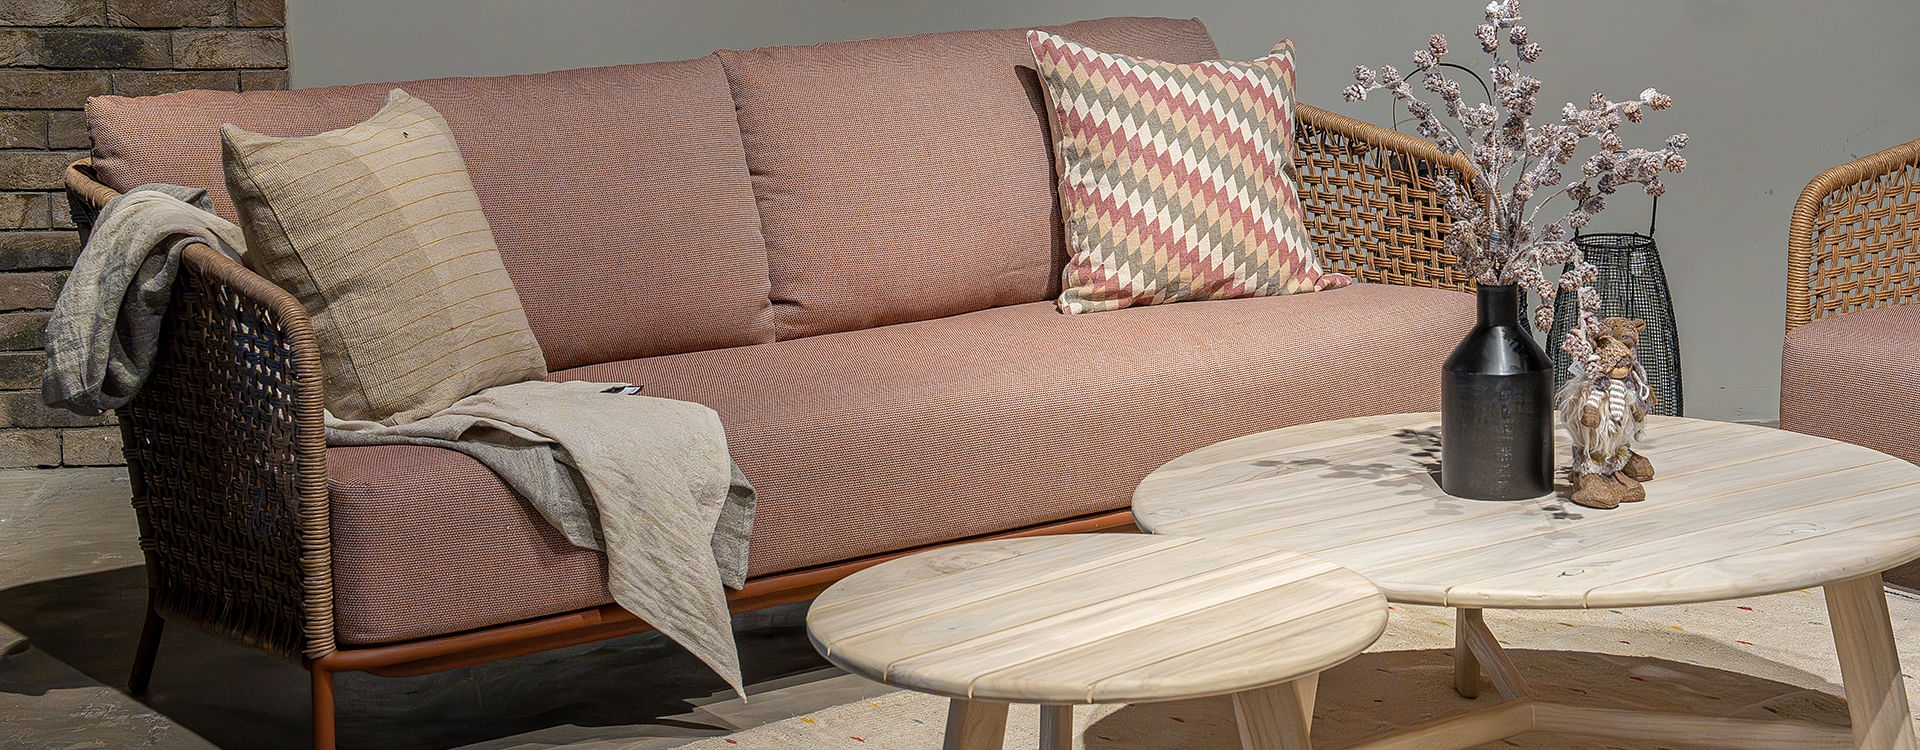 A three-seater sofa features natural wood-coloured straw weave detailing and terracttoa fabric